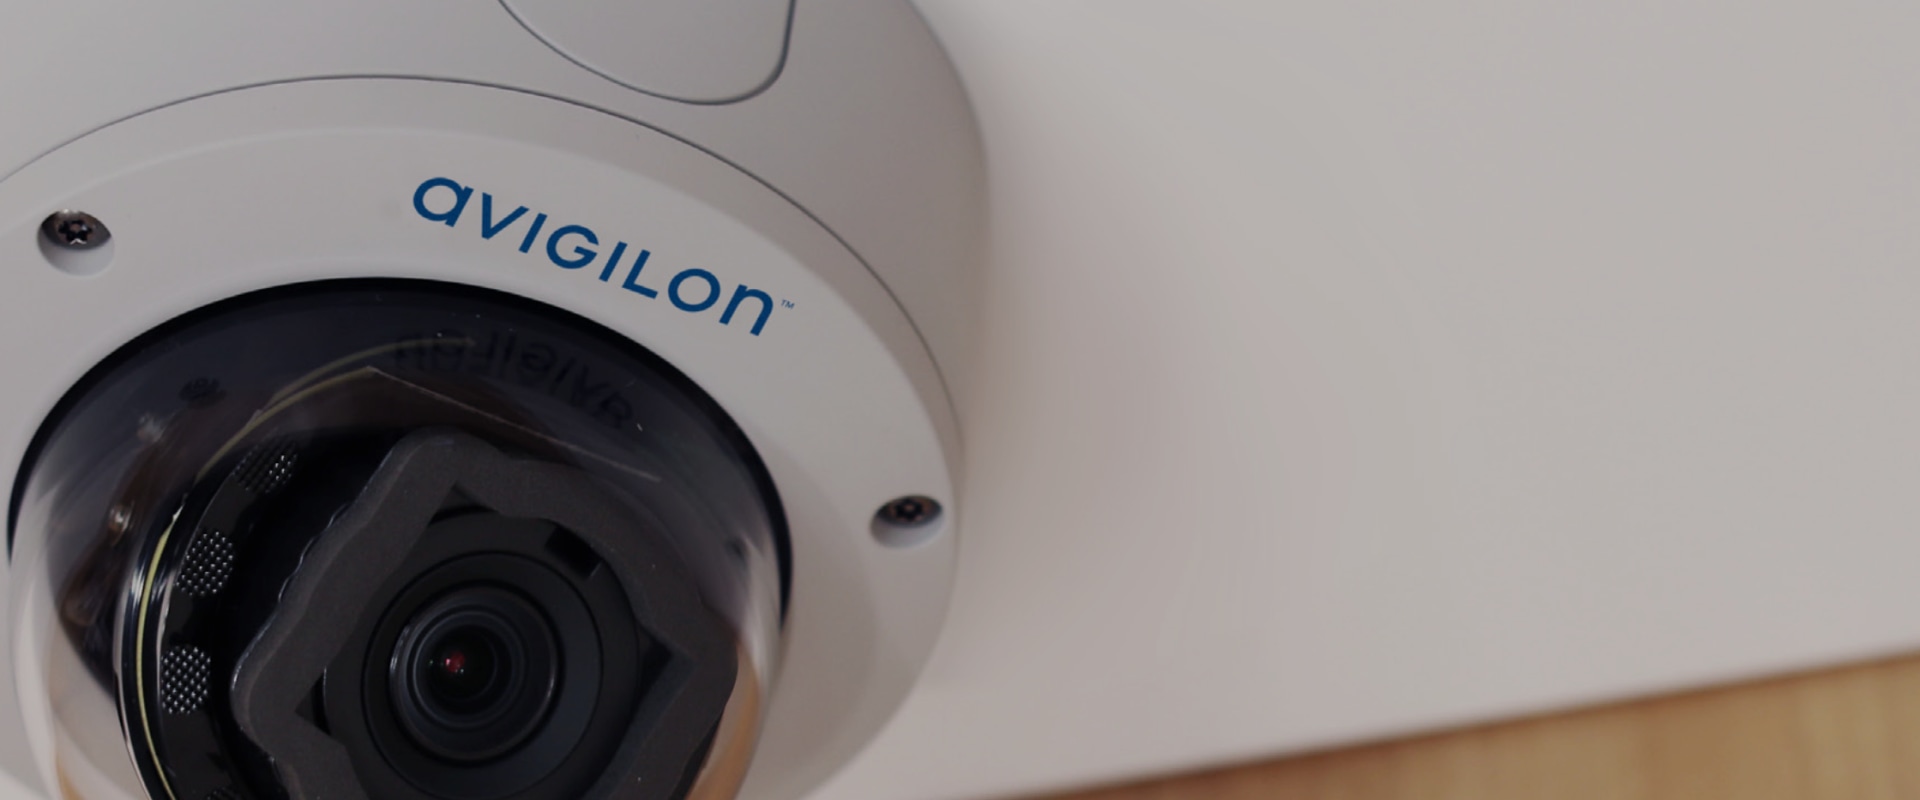 Dome Cameras: An In-Depth Look